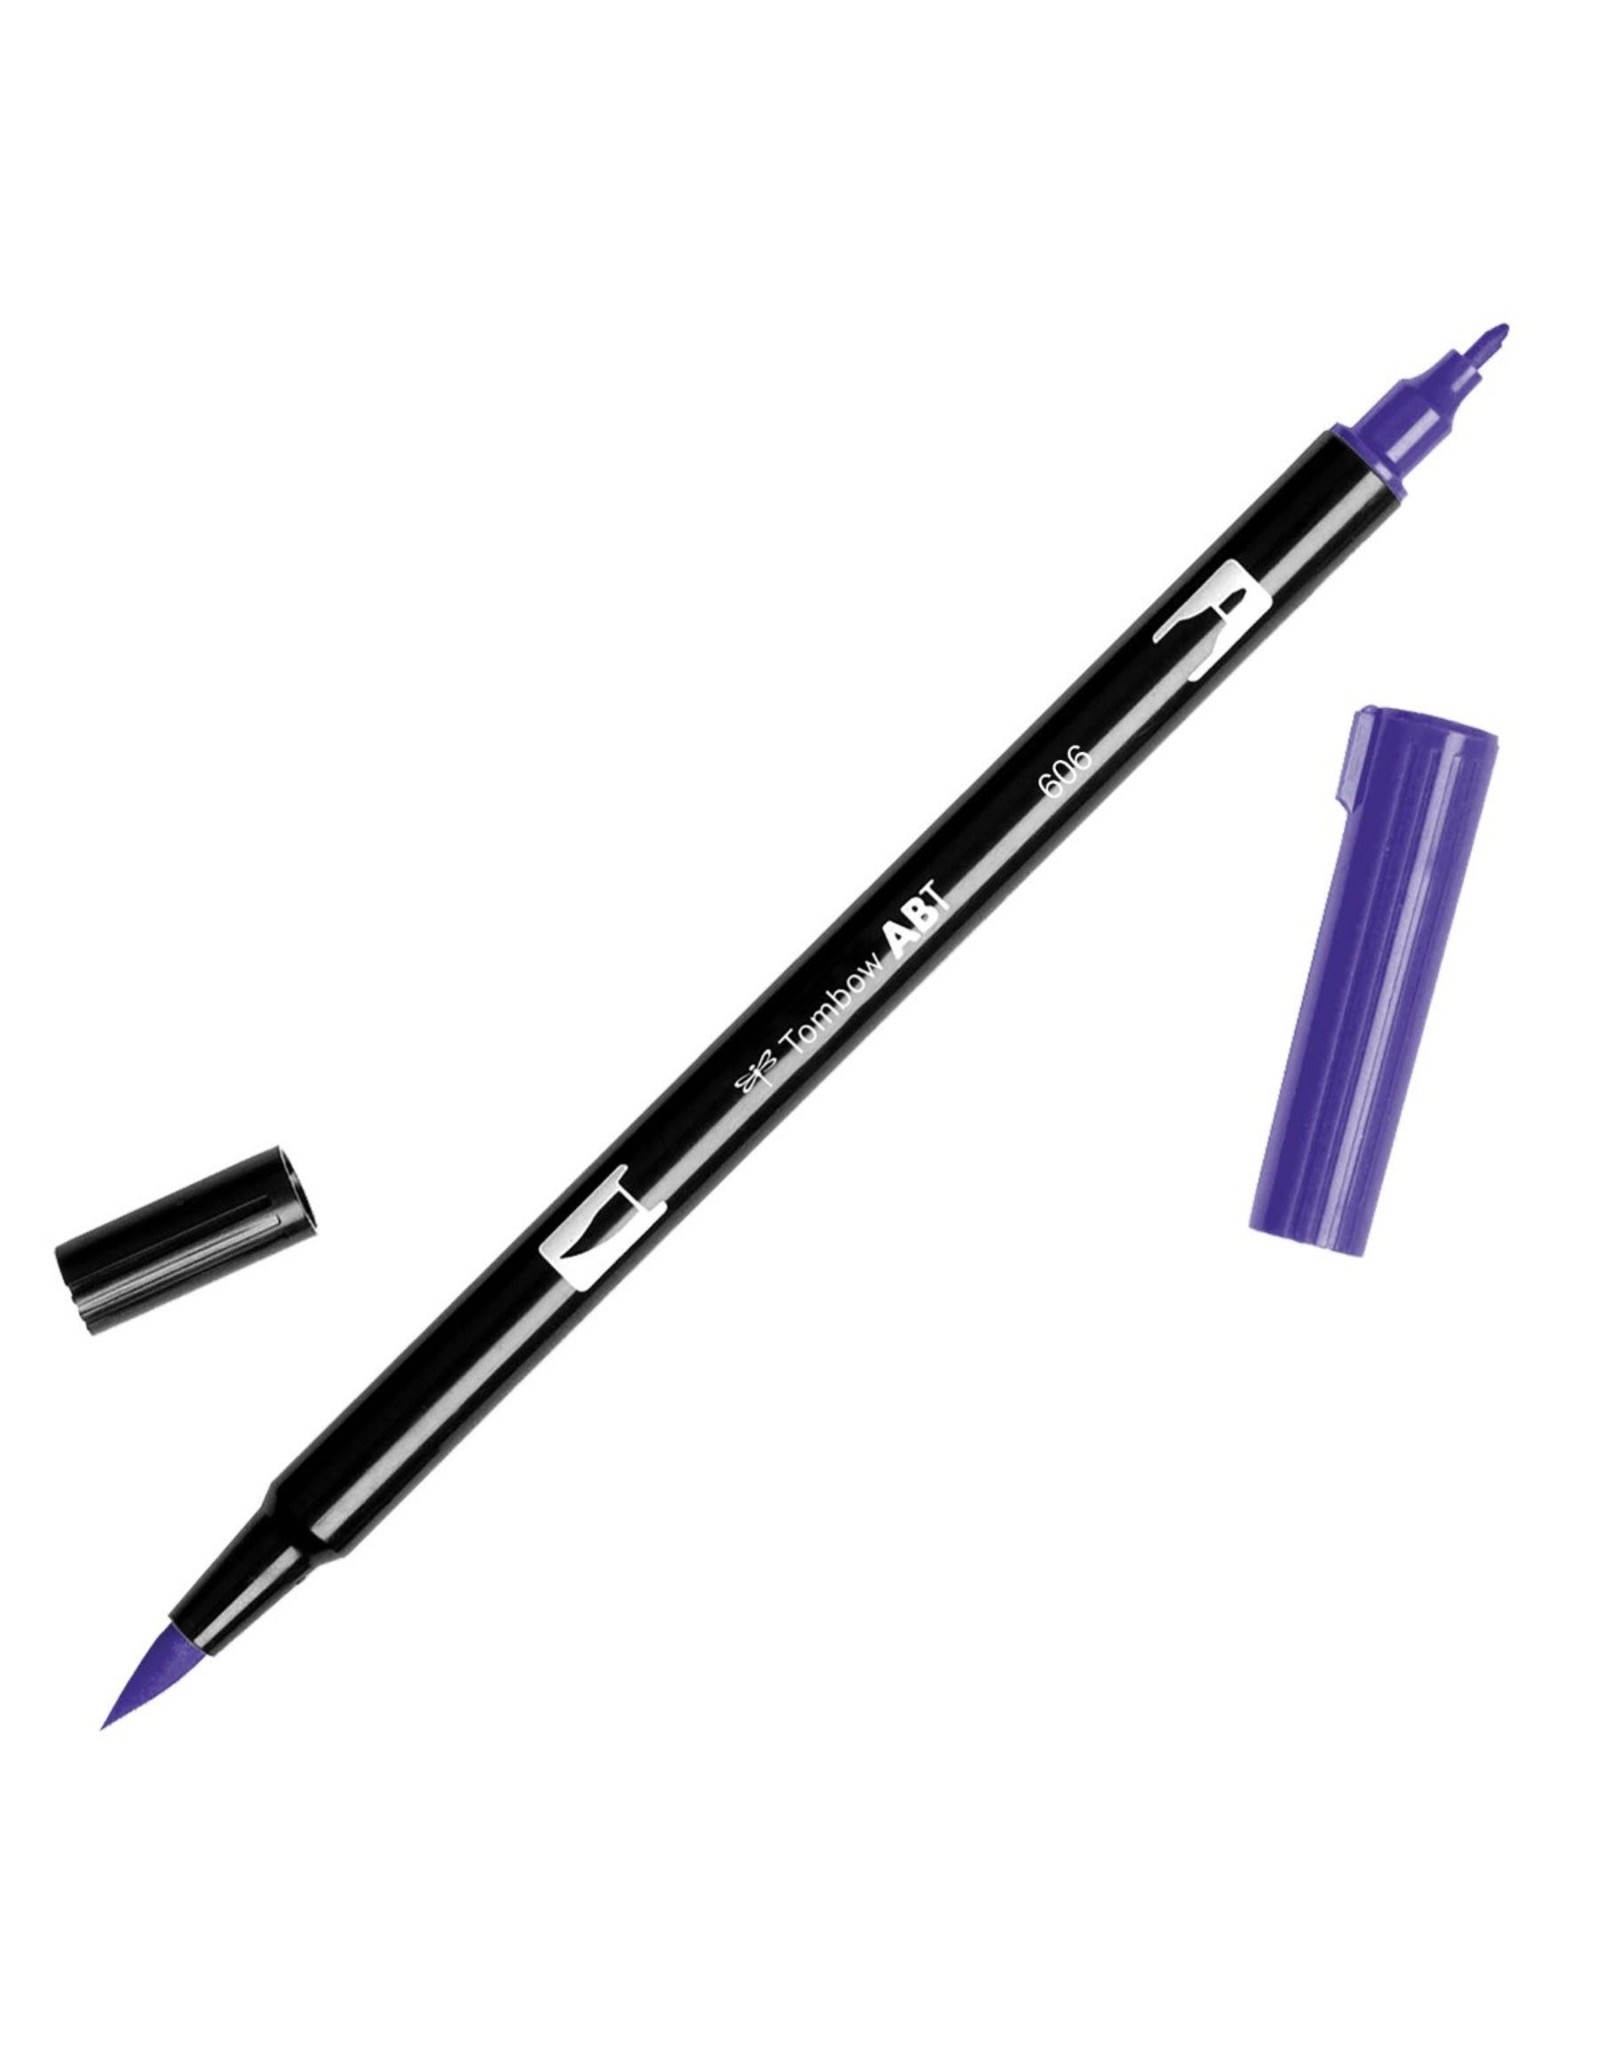 TOMBOW TOMBOW ABT-606 VIOLET DUAL BRUSH MARKER